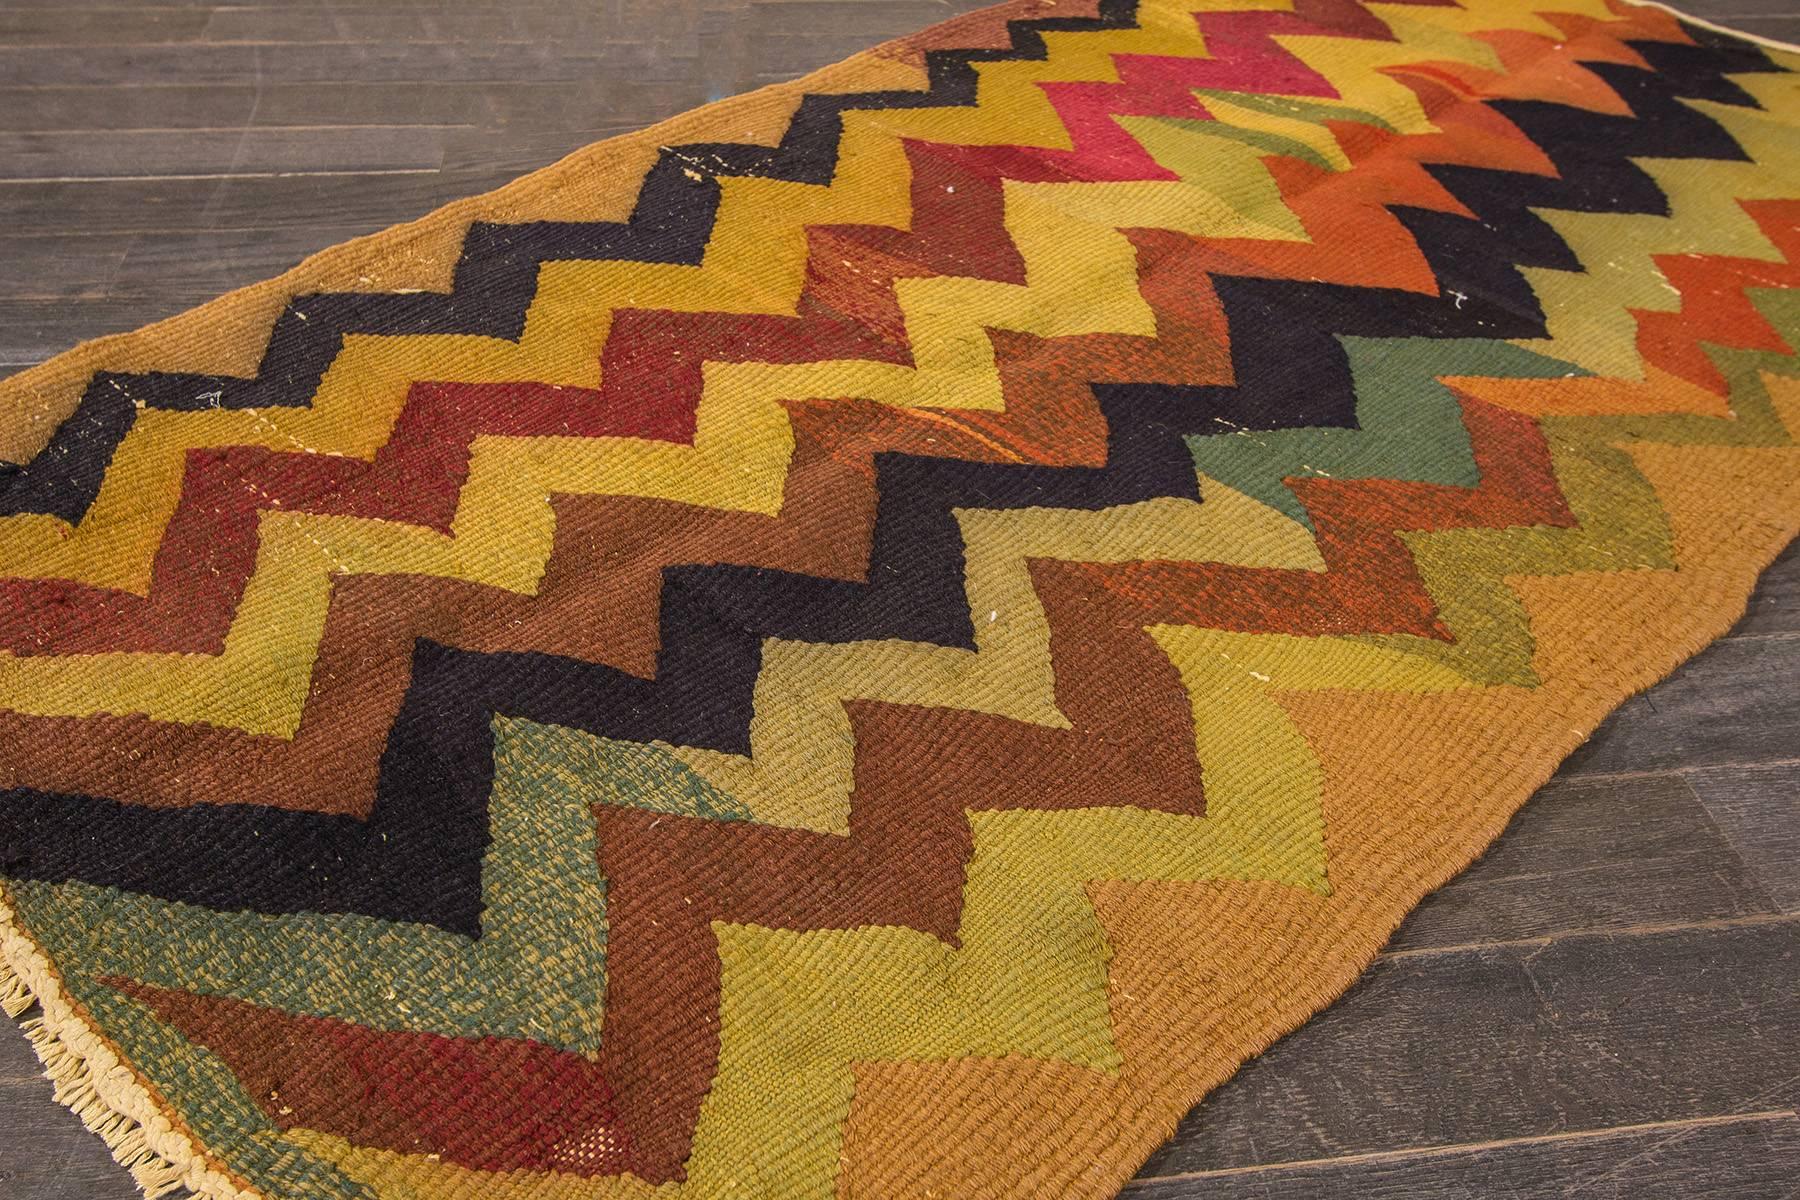 A handwoven Turkish Kilim rug with a geometric stripe pattern. Accents of yellow, black, blue, green and orange throughout.